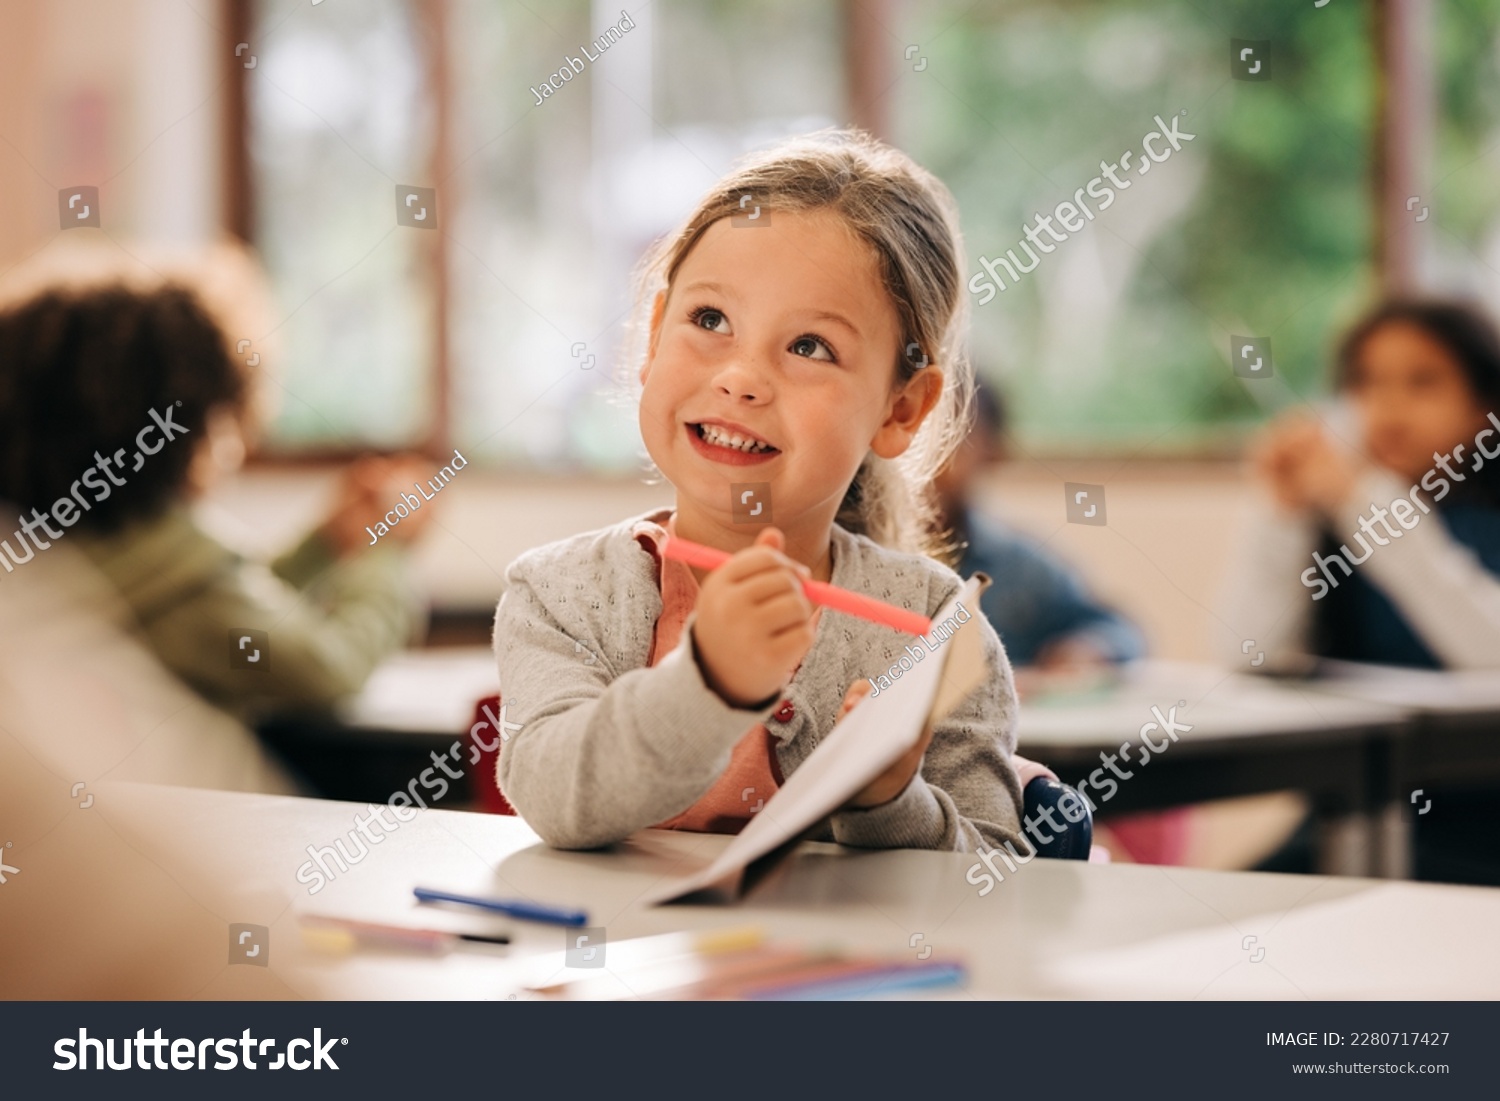 Happy little girl learning to draw with a colour pencil in an elementary art class. Primary school kid talking to her teacher as she receives quality education in a positive learning environment. #2280717427